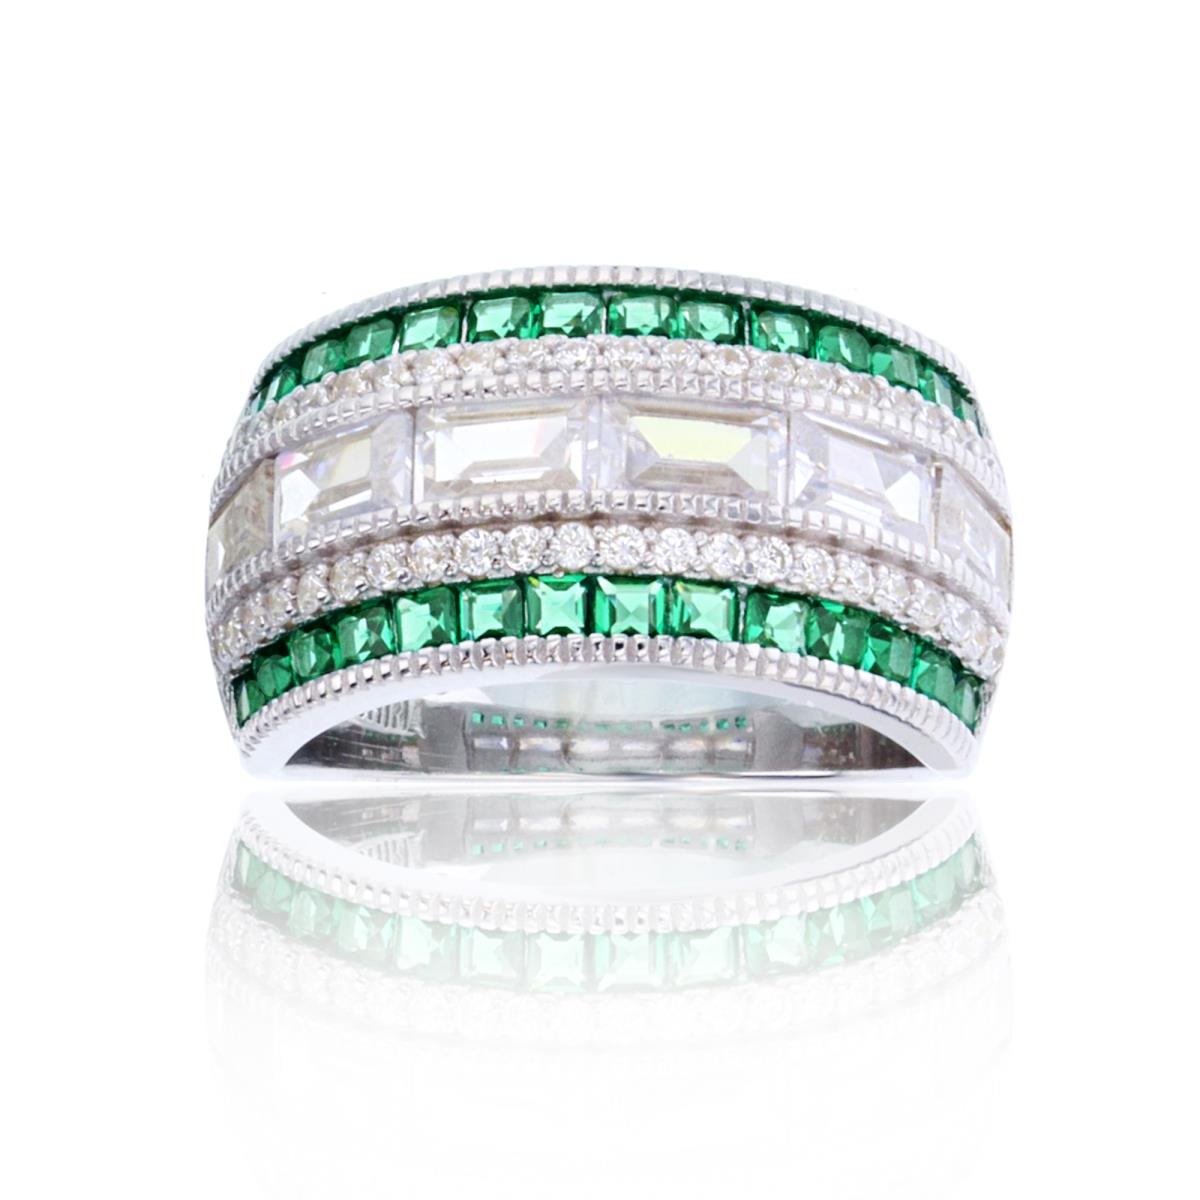 Sterling Silver Rhodium Alternate Rnd White & SB White/Emerald CZ Rows Beaded Wide Band